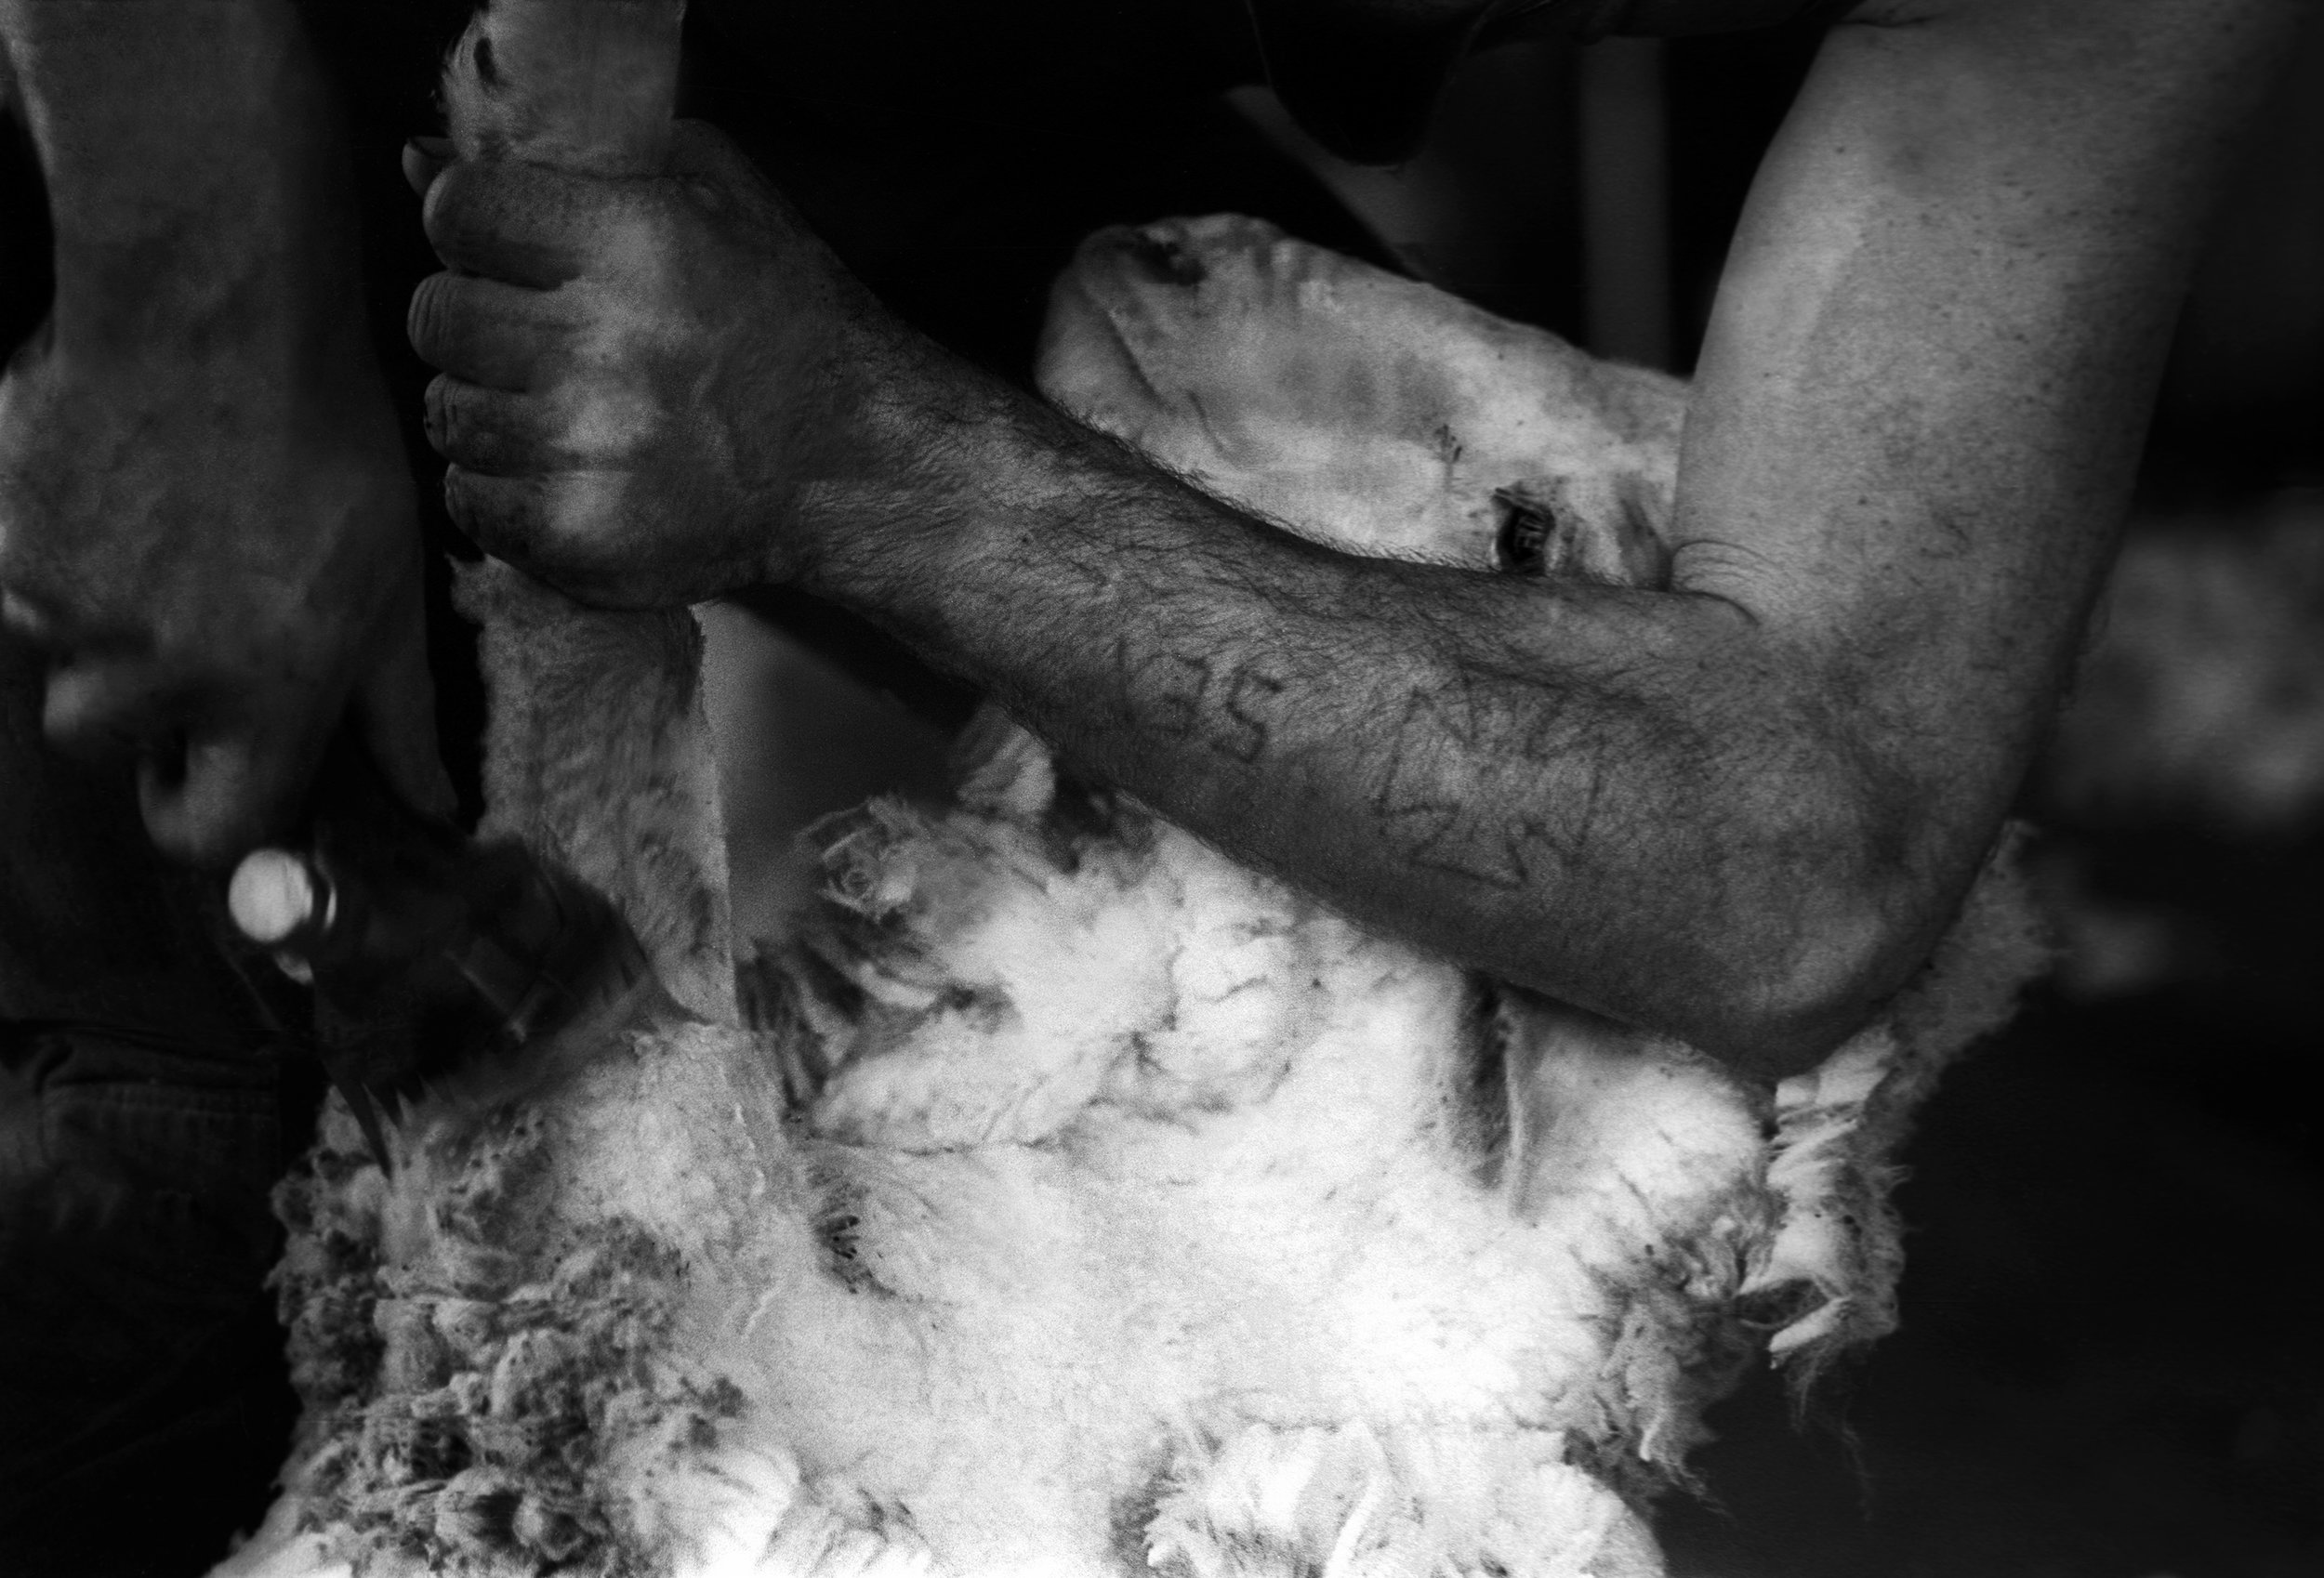  A merino sheep being relieved of its heavy fleece by a deft shearer. Outback NSW, Australia. 1995 